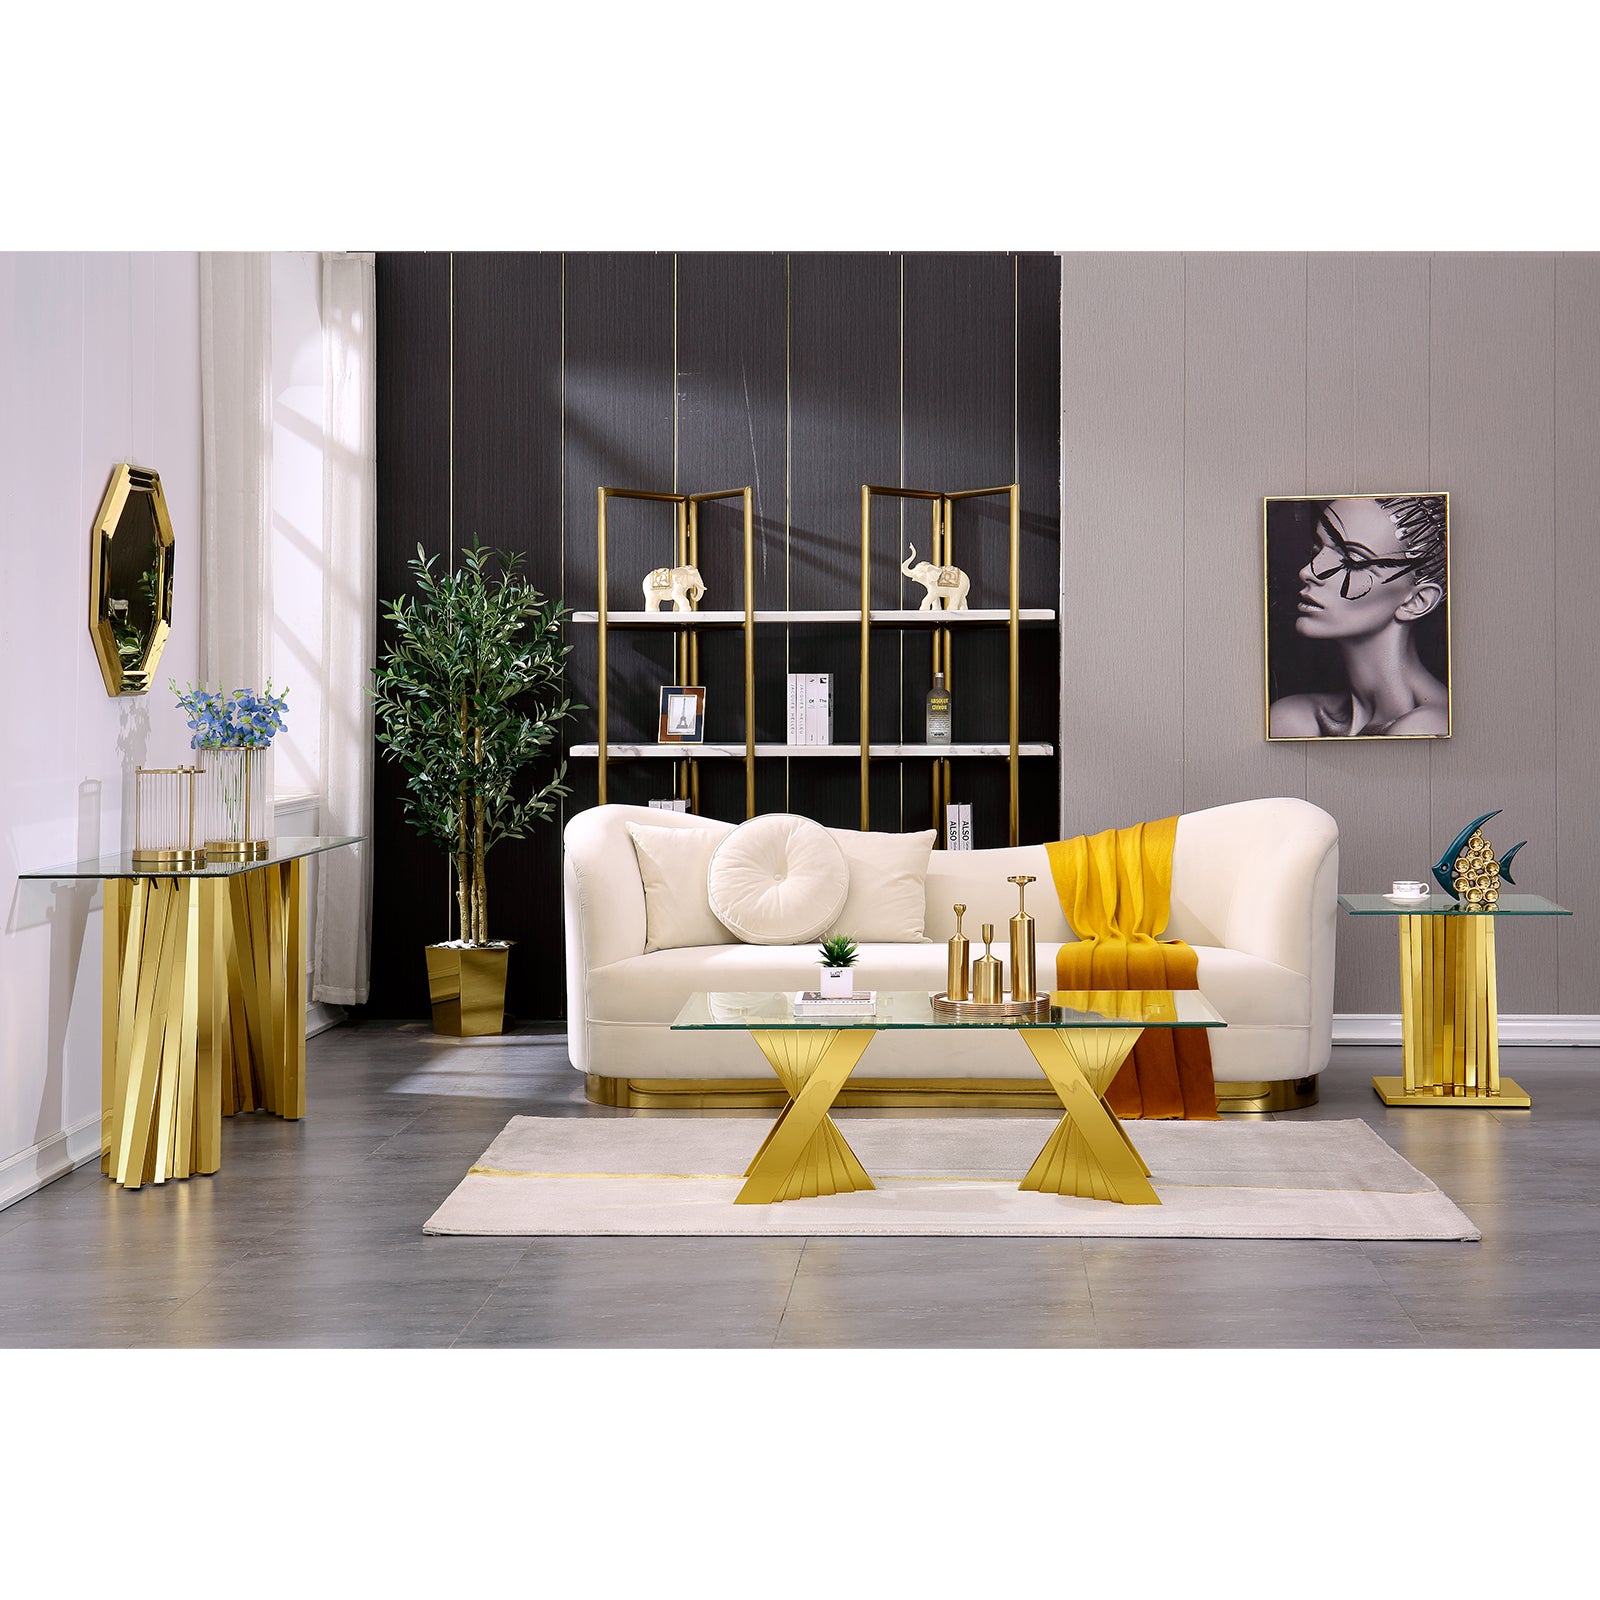 Glass End Table with Gold Polished Metal Scalloped Legs | E413